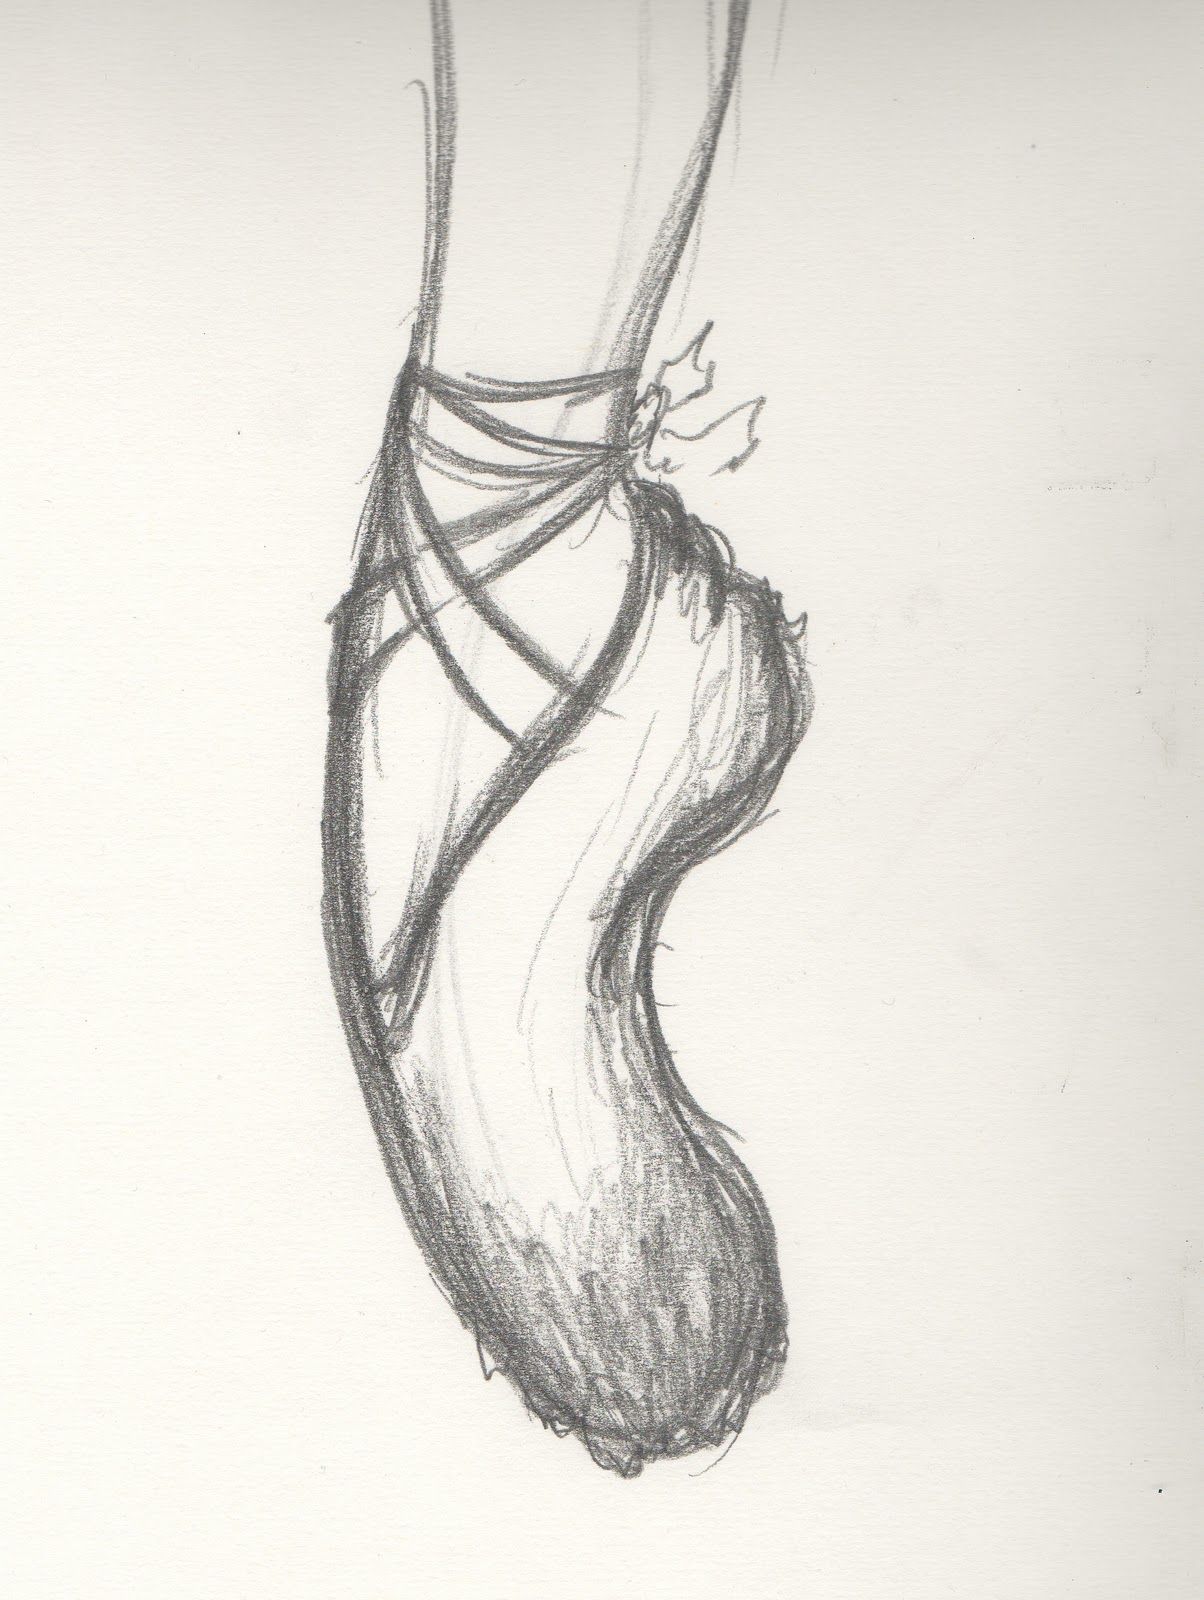 Dancing Shoes - Final Year Film: Old Shoe sketches